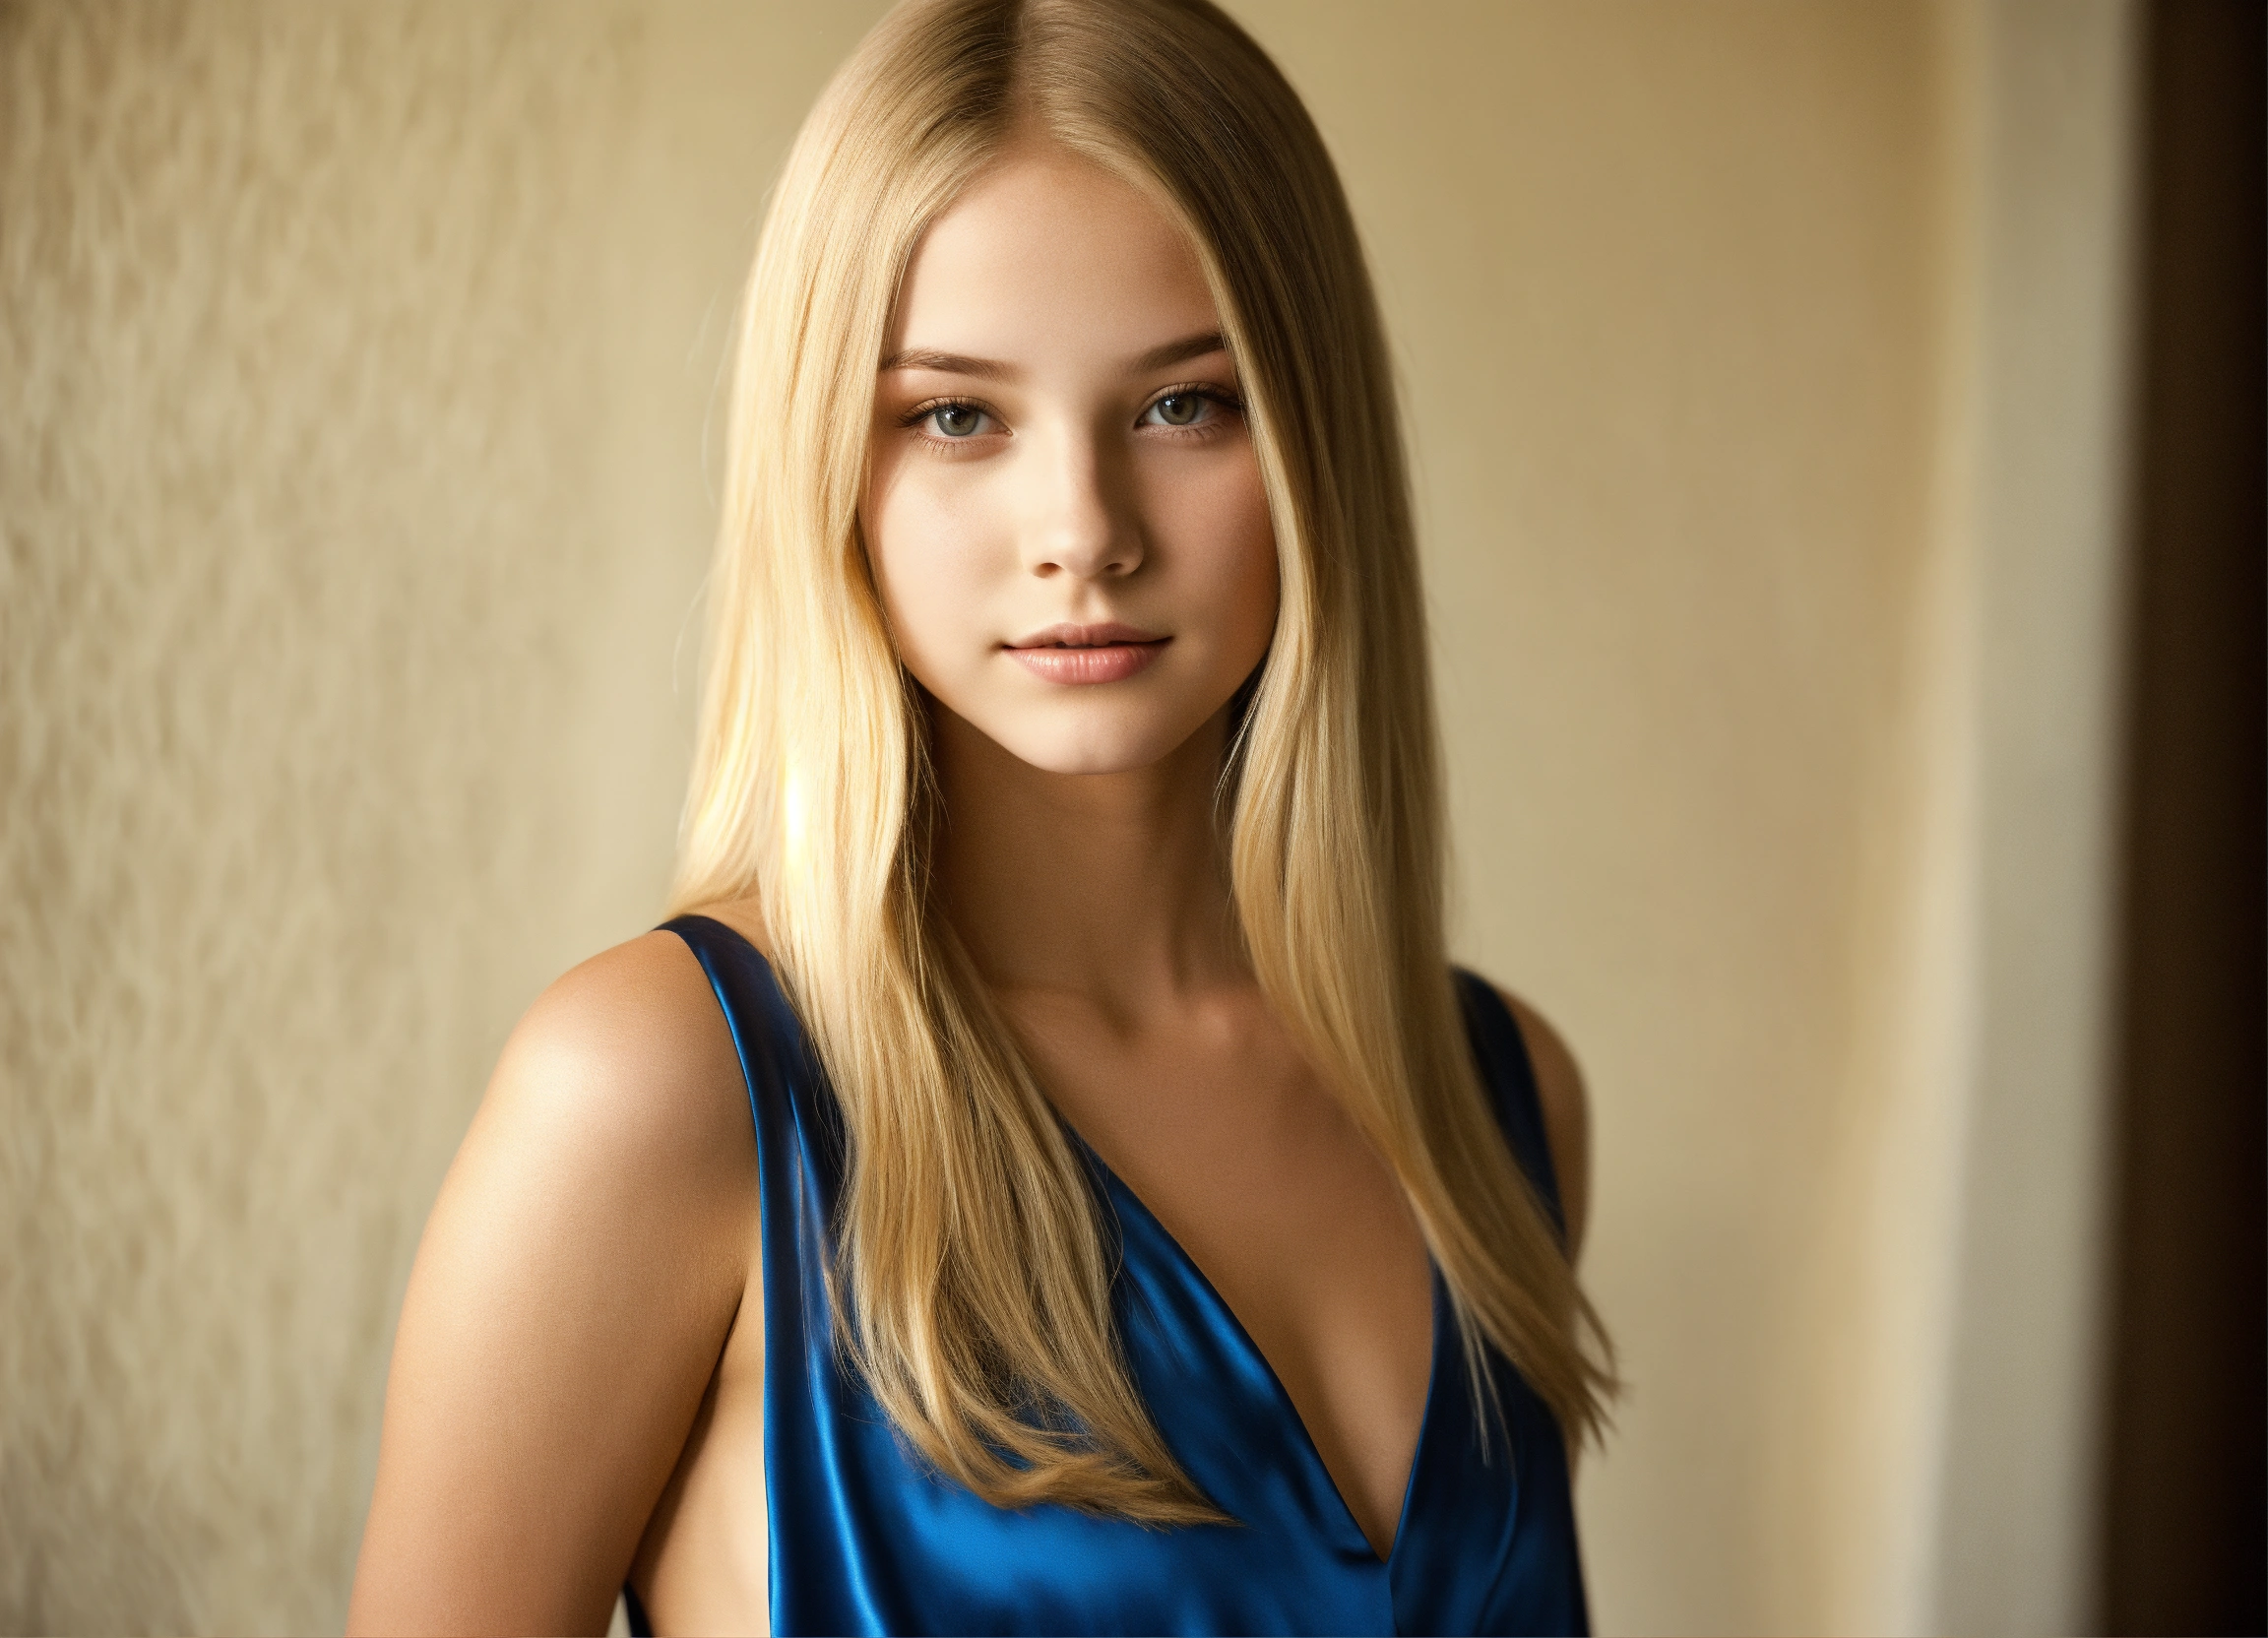 Lexica - Very pretty tween blonde girl, straight hair, centre parting ...